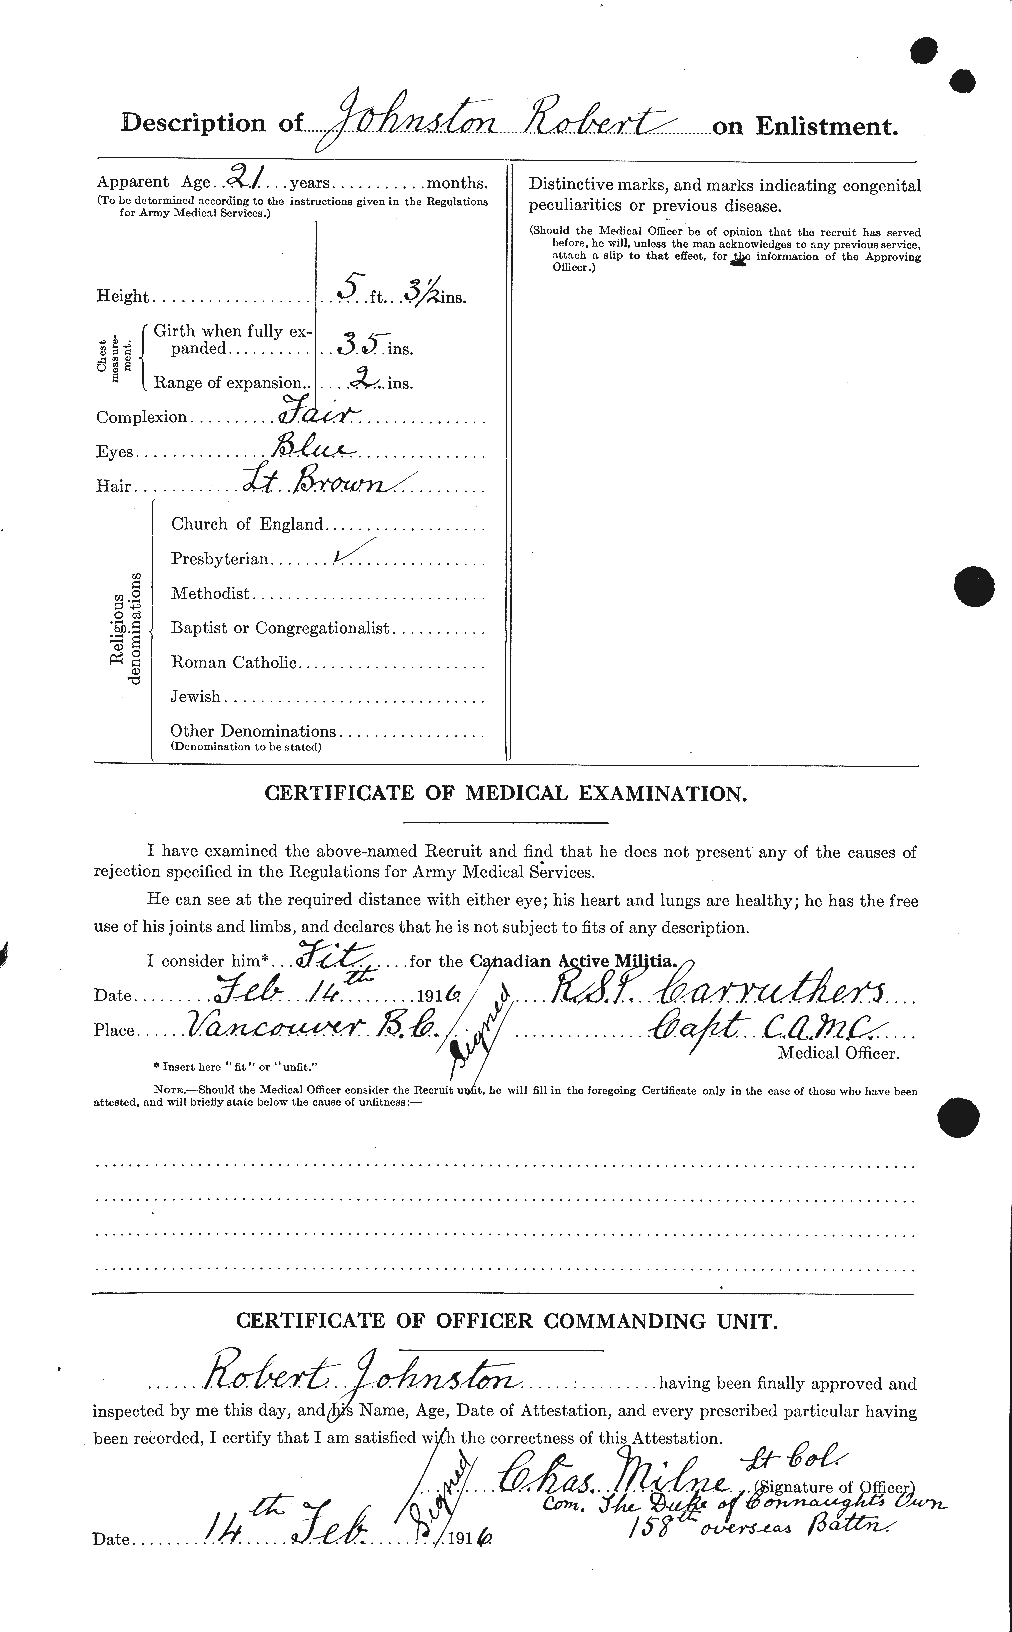 Personnel Records of the First World War - CEF 426989b